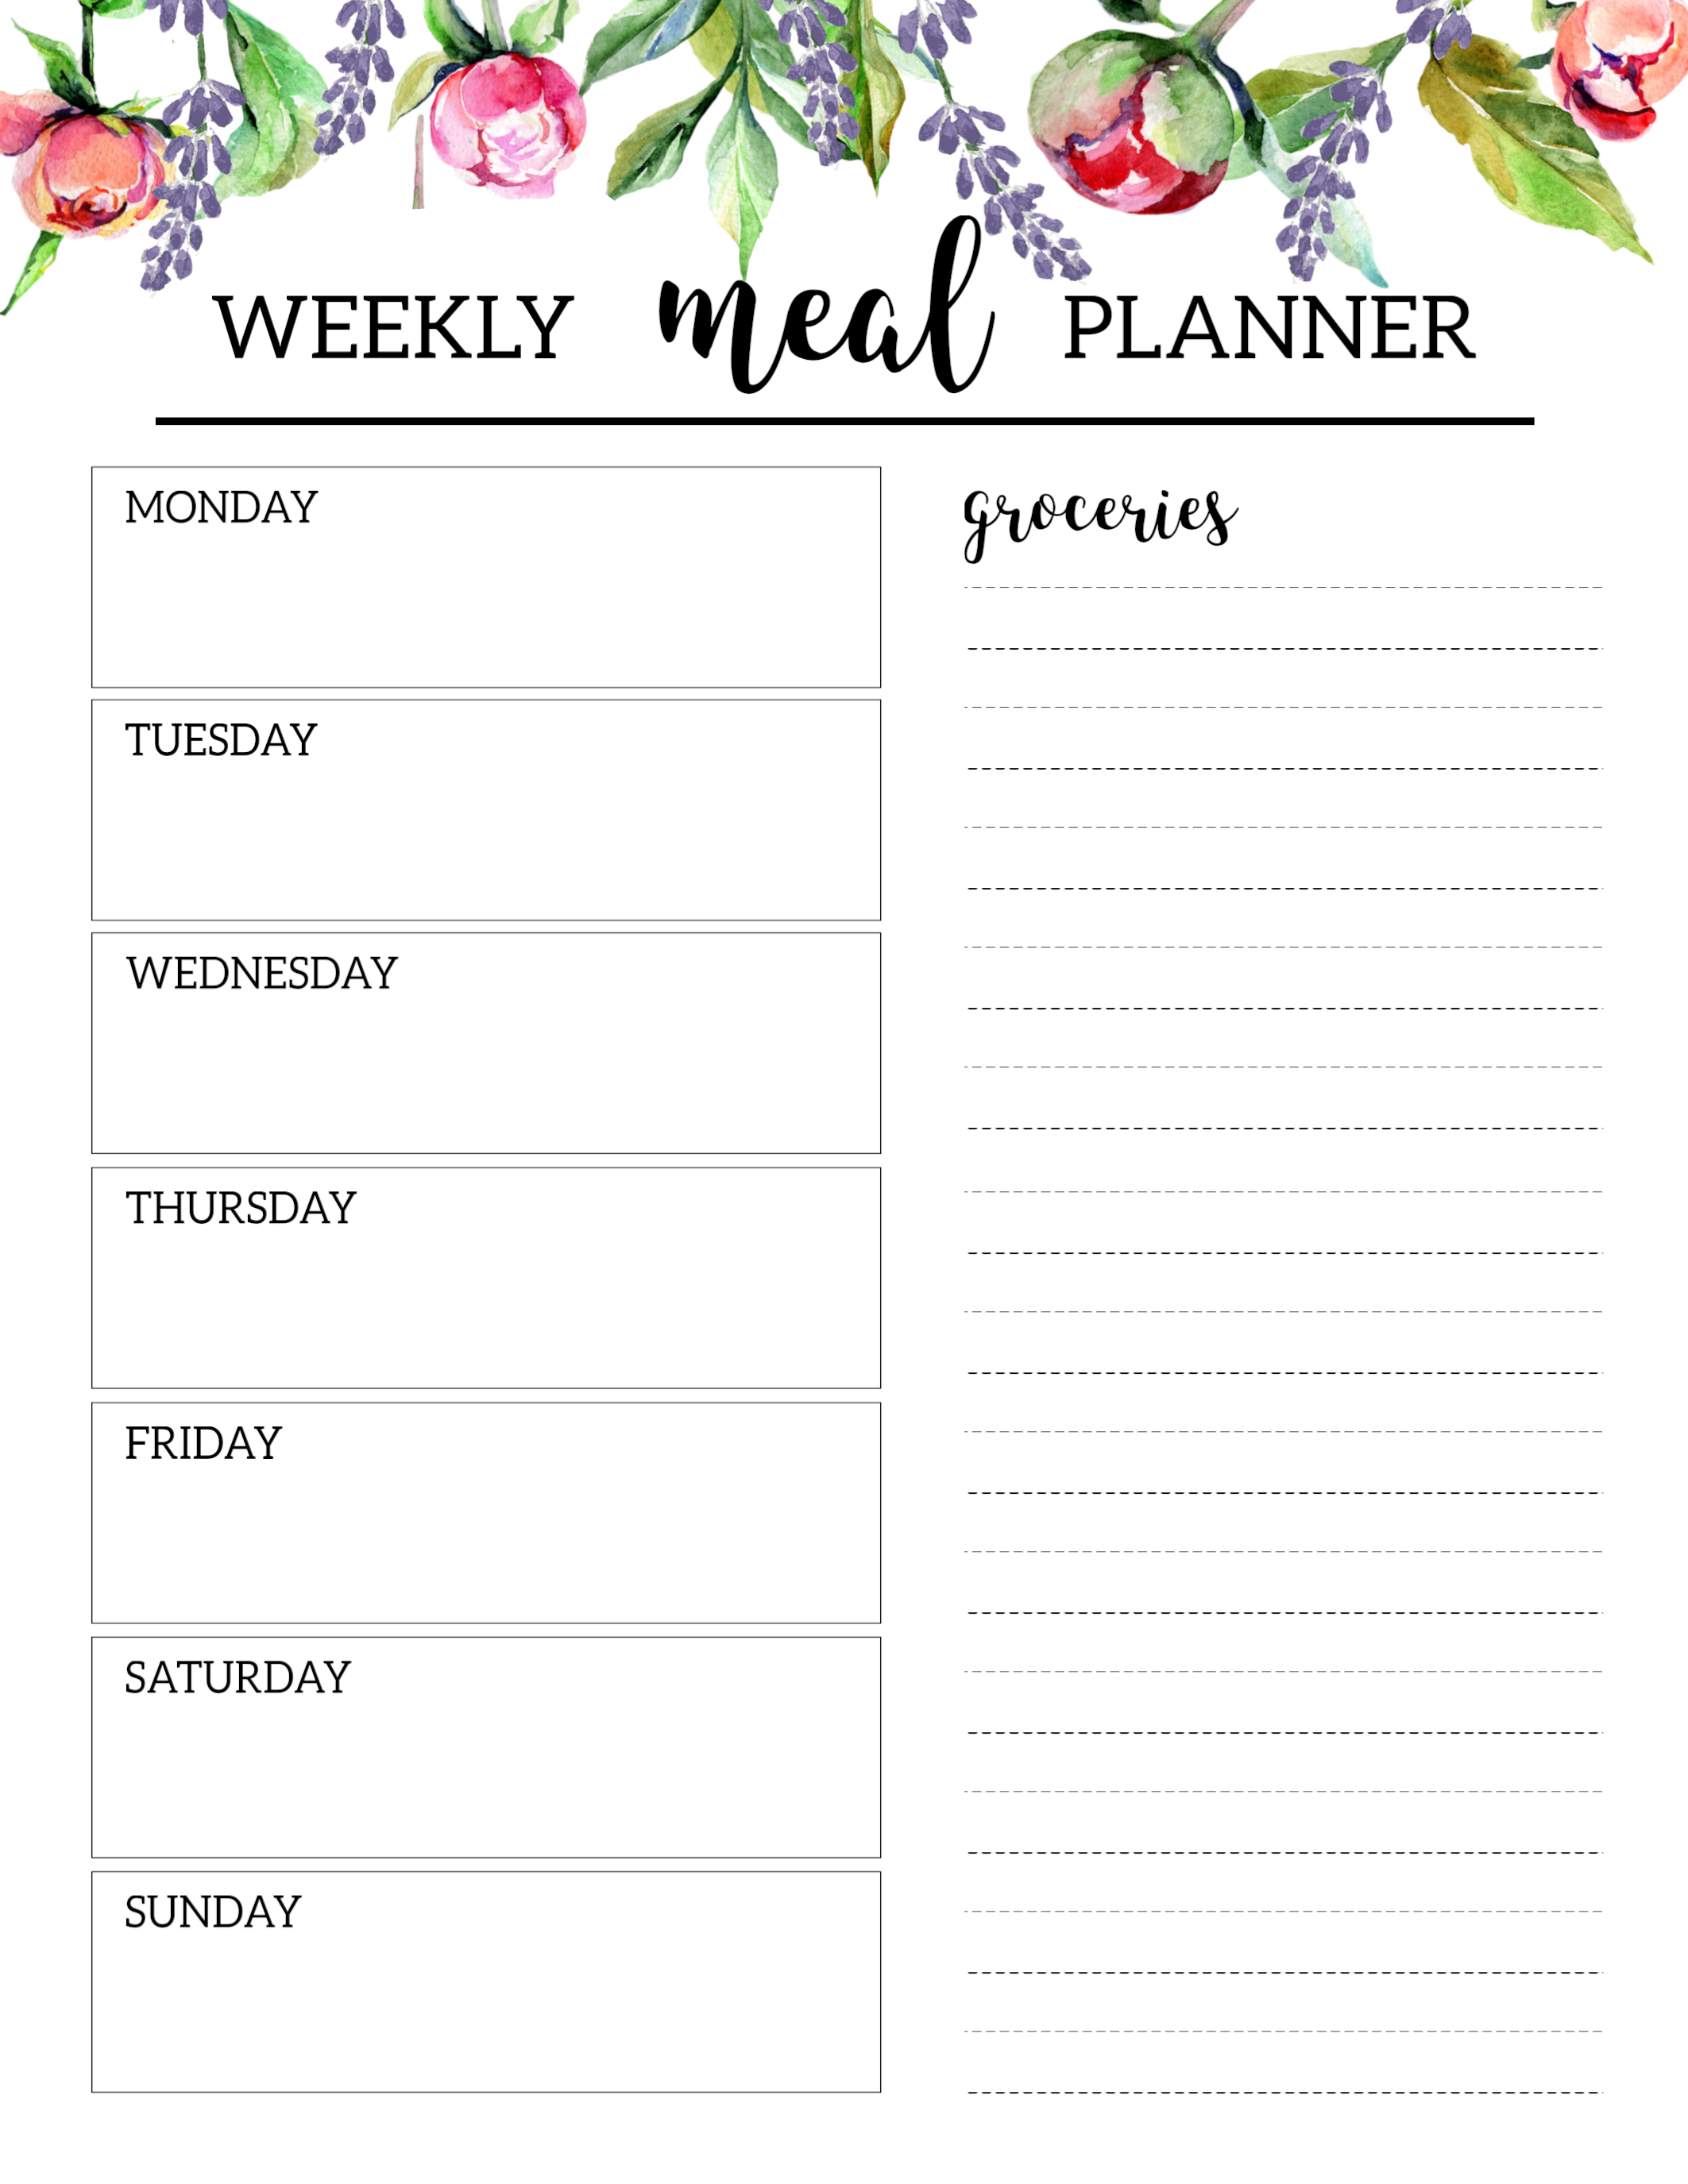 meal-planning-template-mapsnored